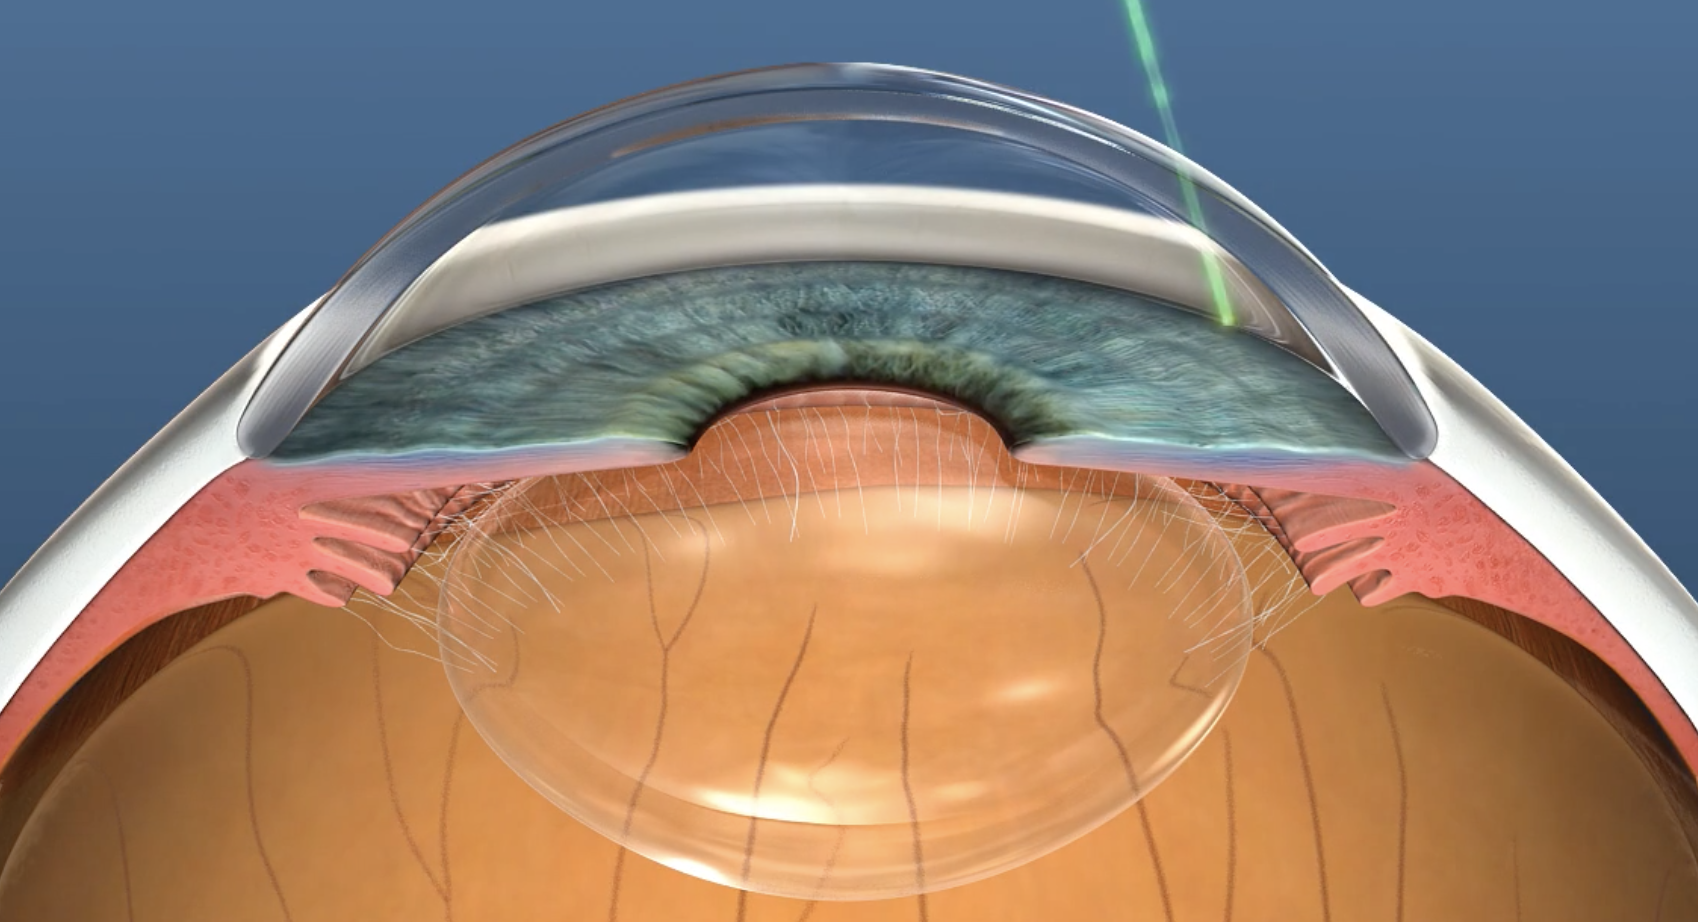 Diagram showing laser light treating the drainage channel of the eye in selective laser trabeculoplasty